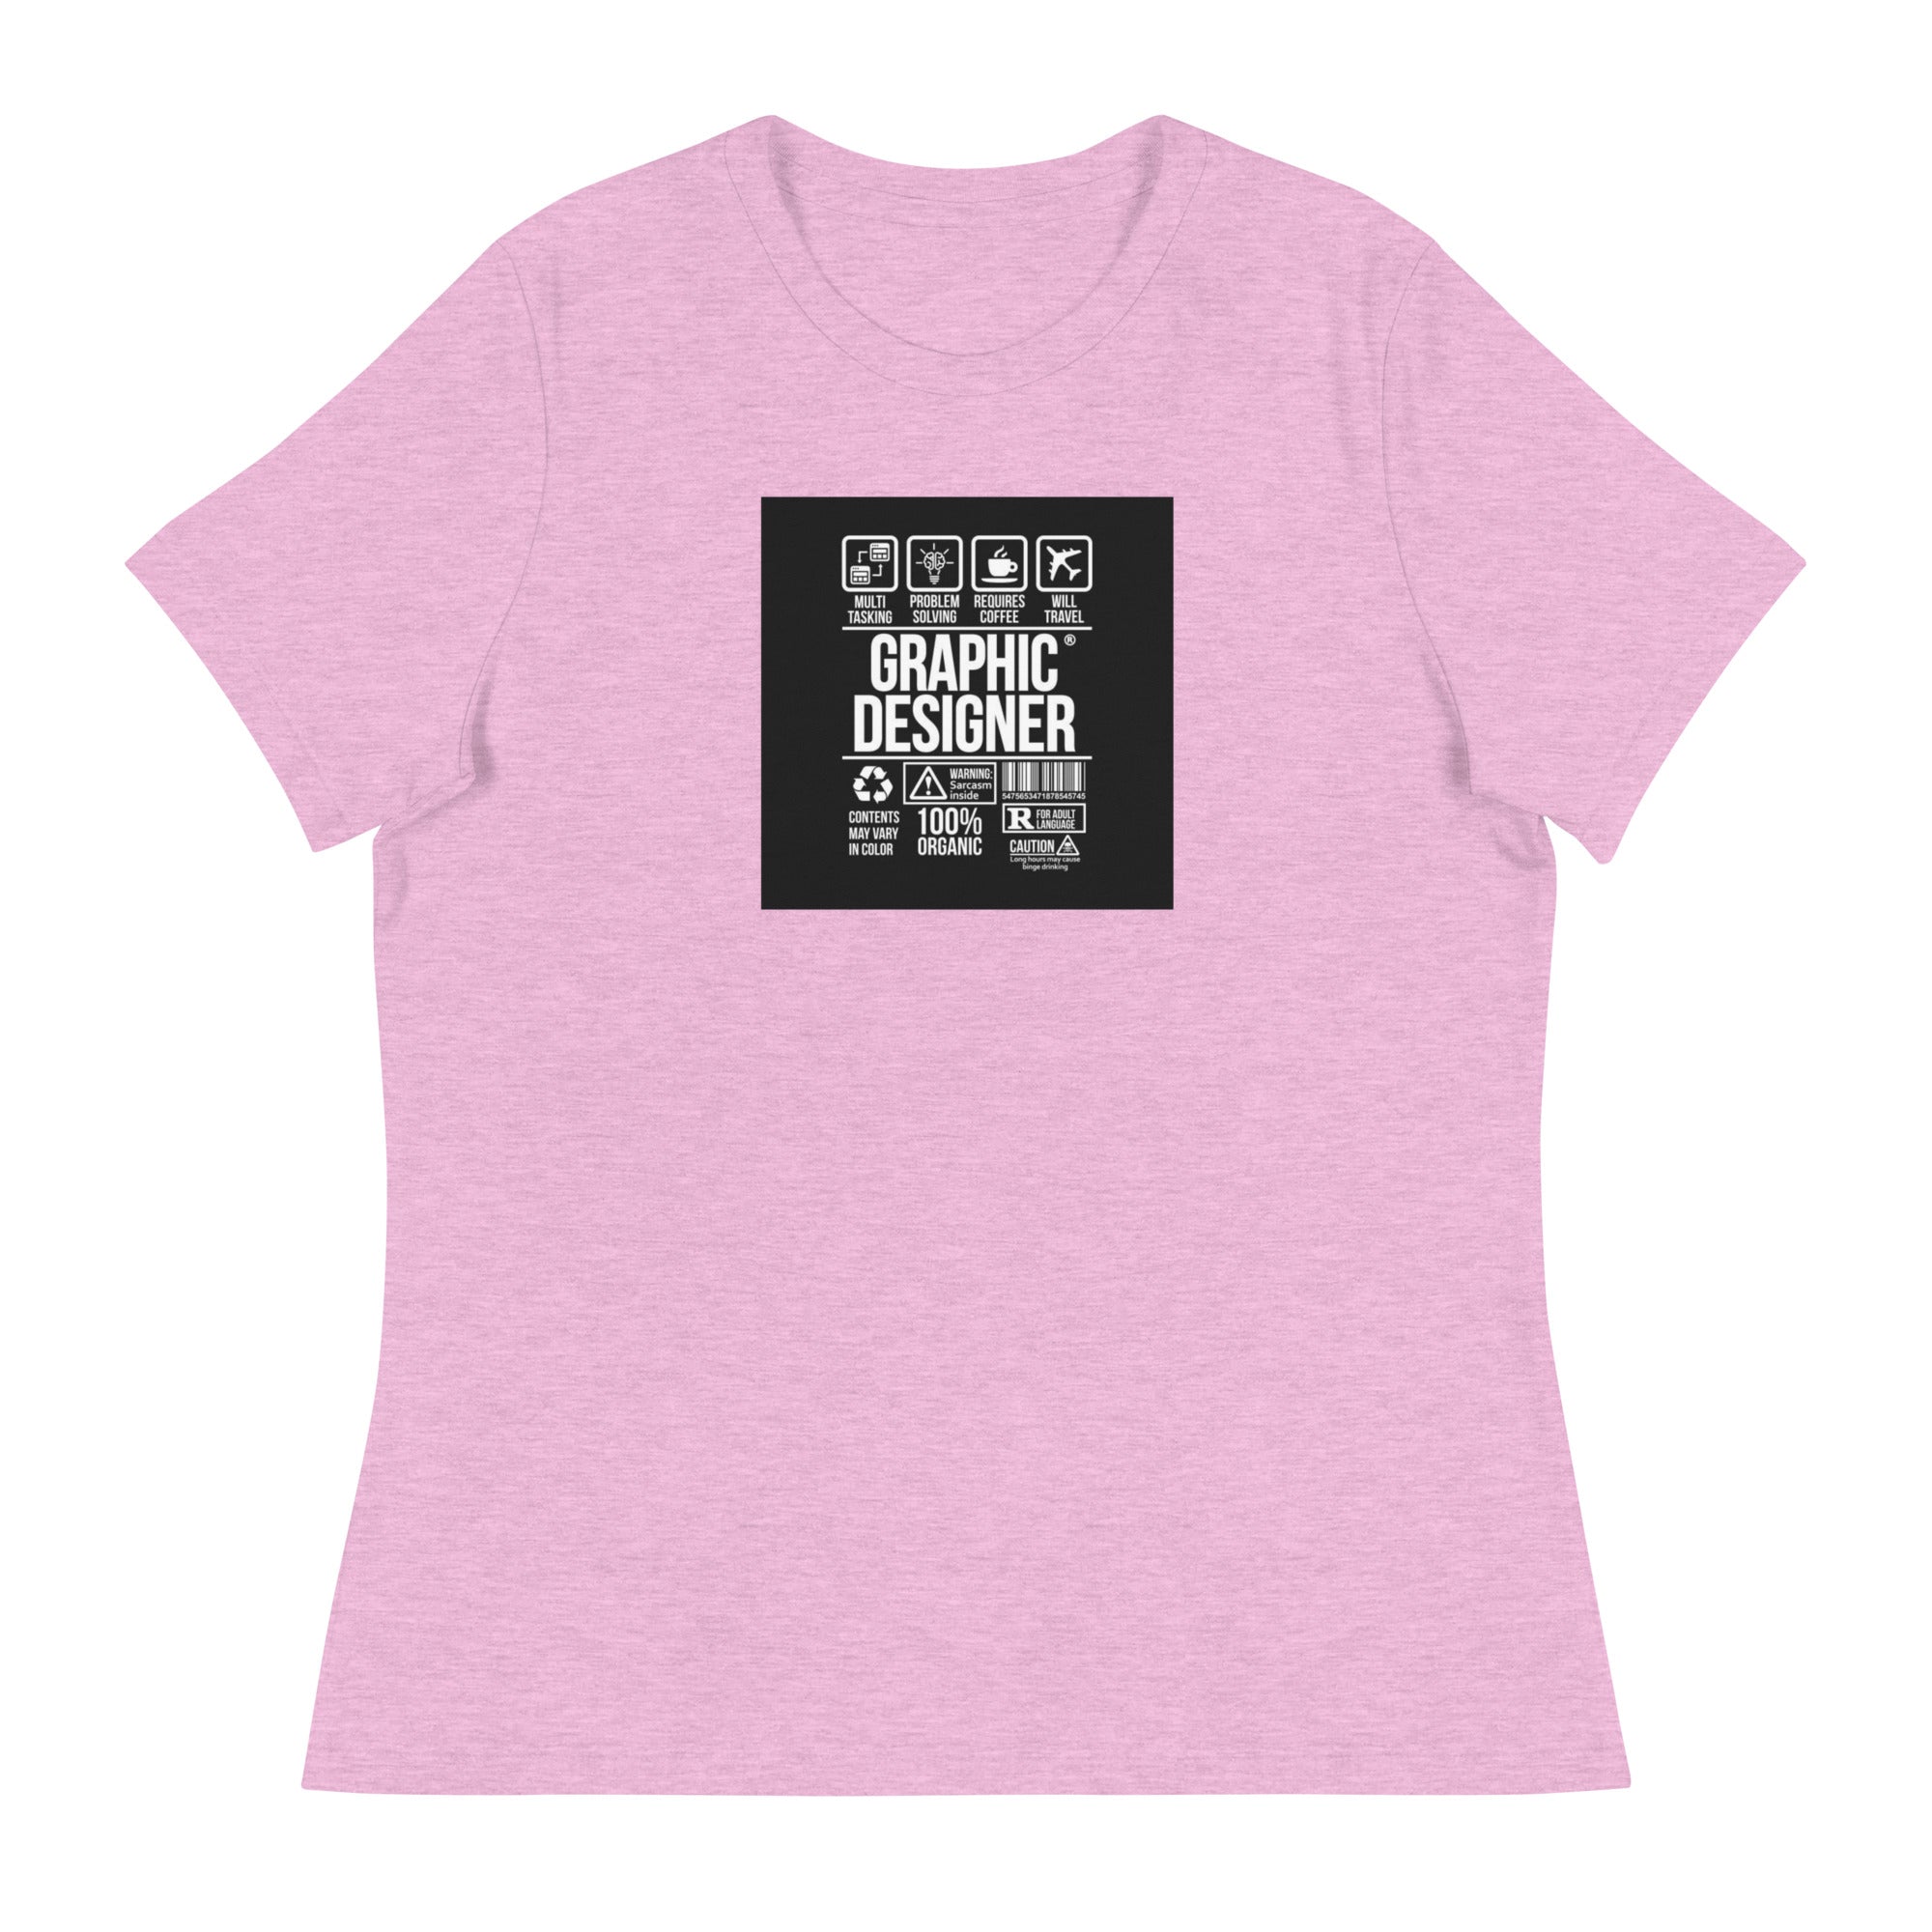 Women's Relaxed T-Shirt - Graphic Designer CMYK - GRAPHIC T-SHIRTS